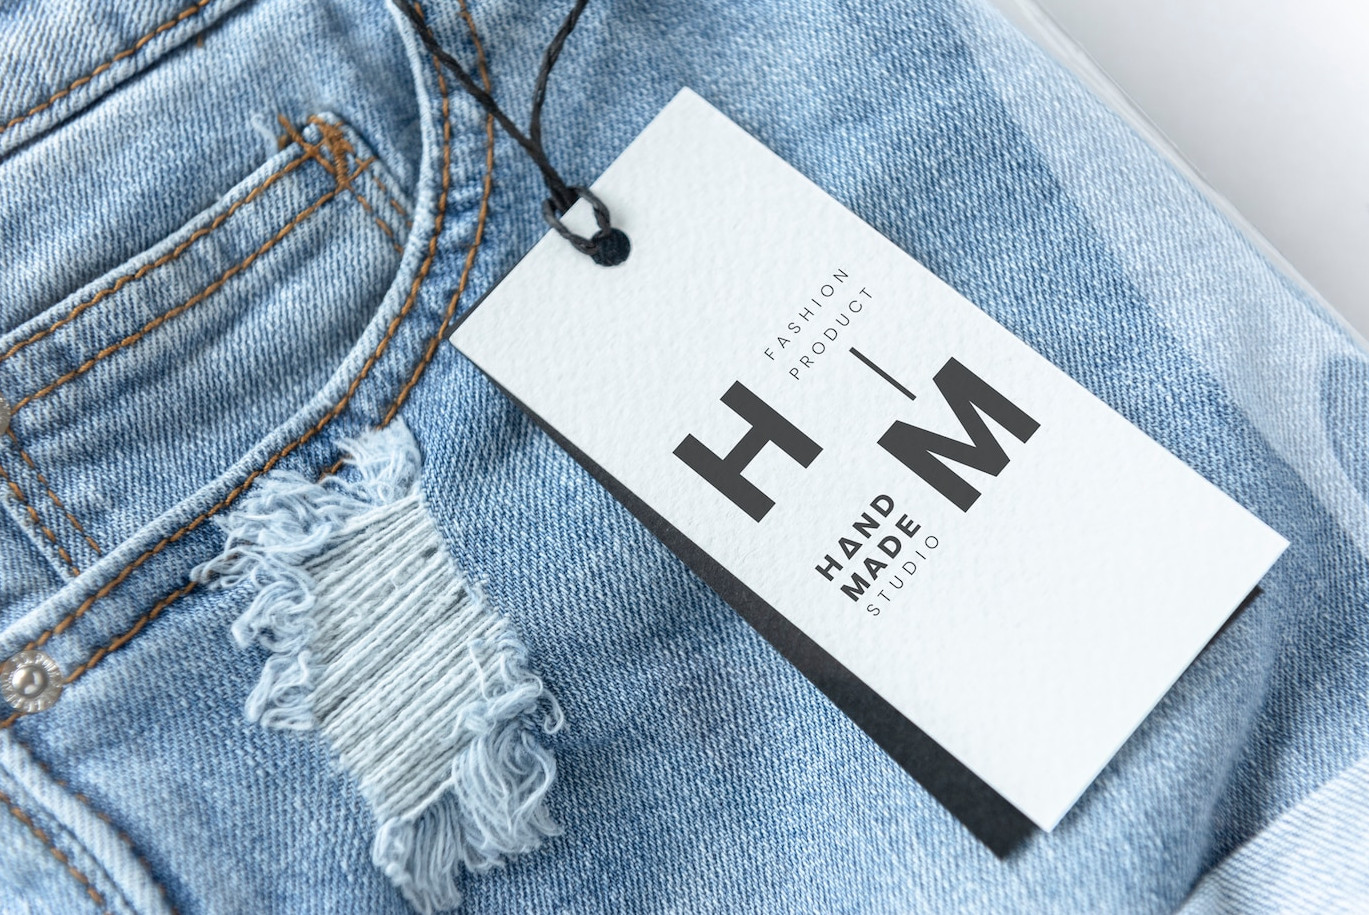 How to find the best clothing brands for you in 2022